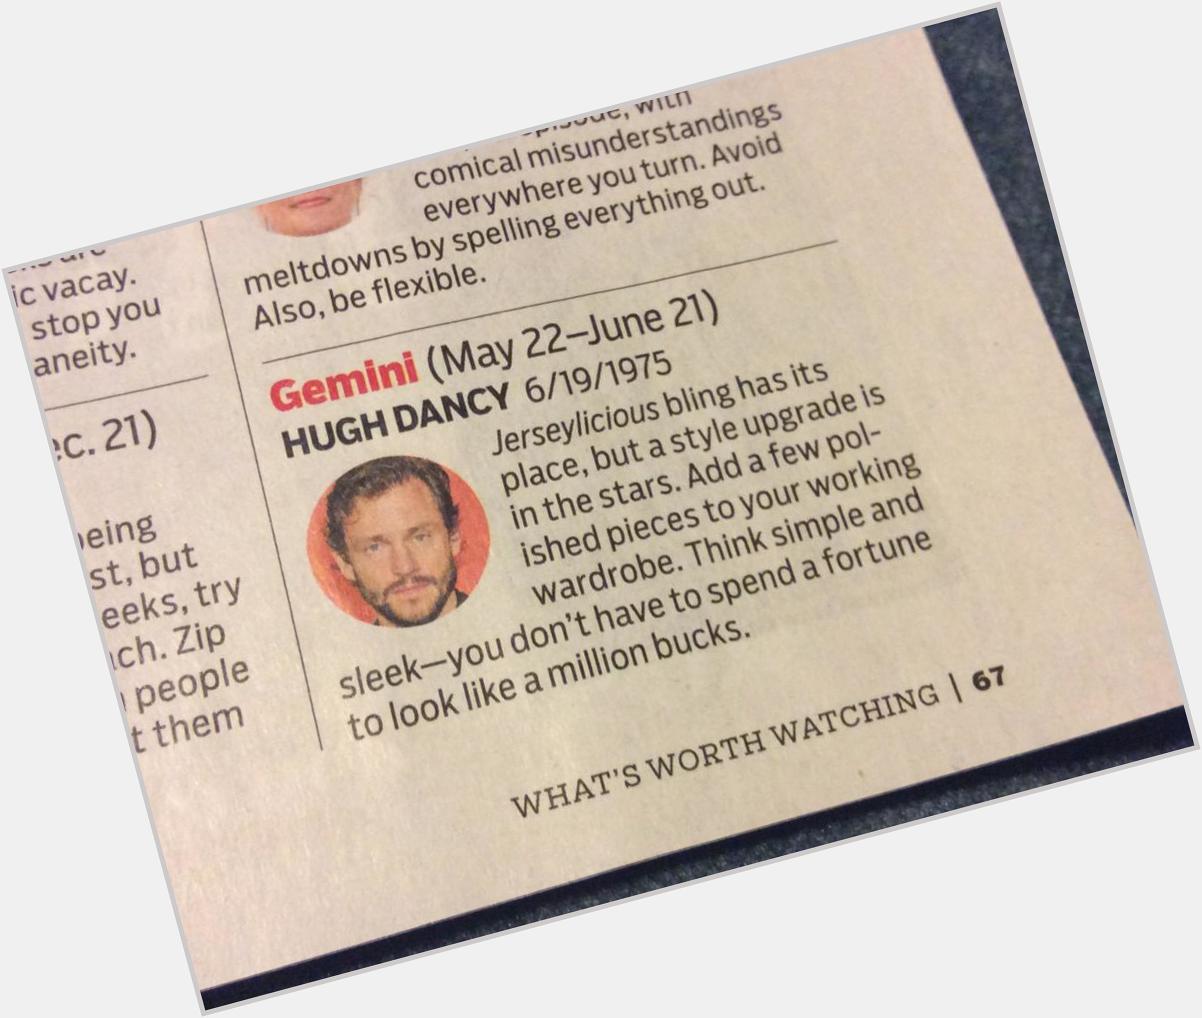 Look who got their picture in TV Guide\s horoscope in the July 22-28, 2015 issue. Happy birthday, Hugh Dancy! 